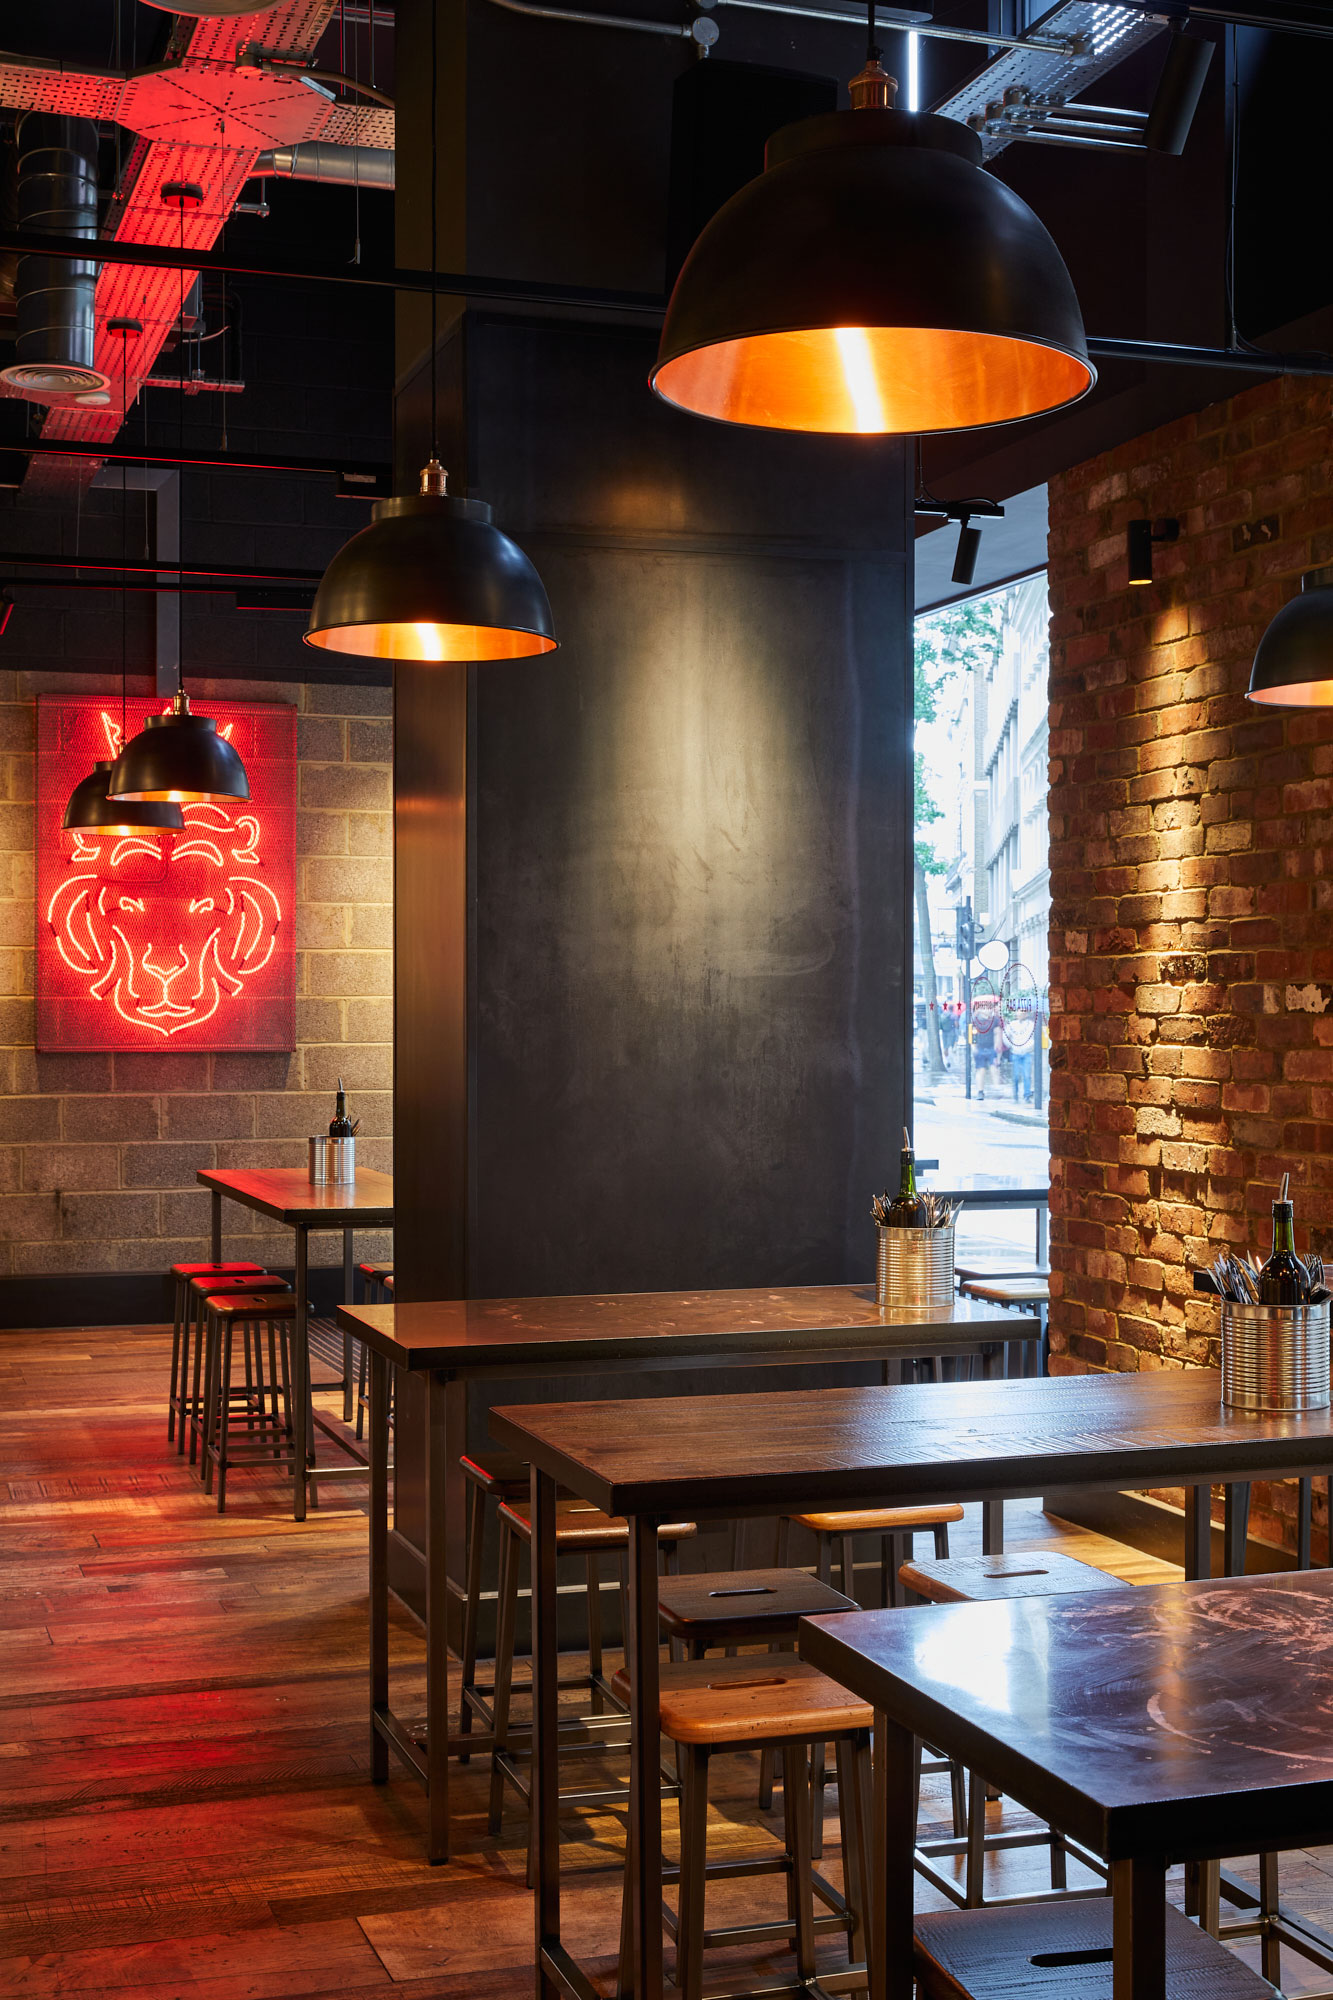 Pizza Union reclaimed aesthetic in London branch